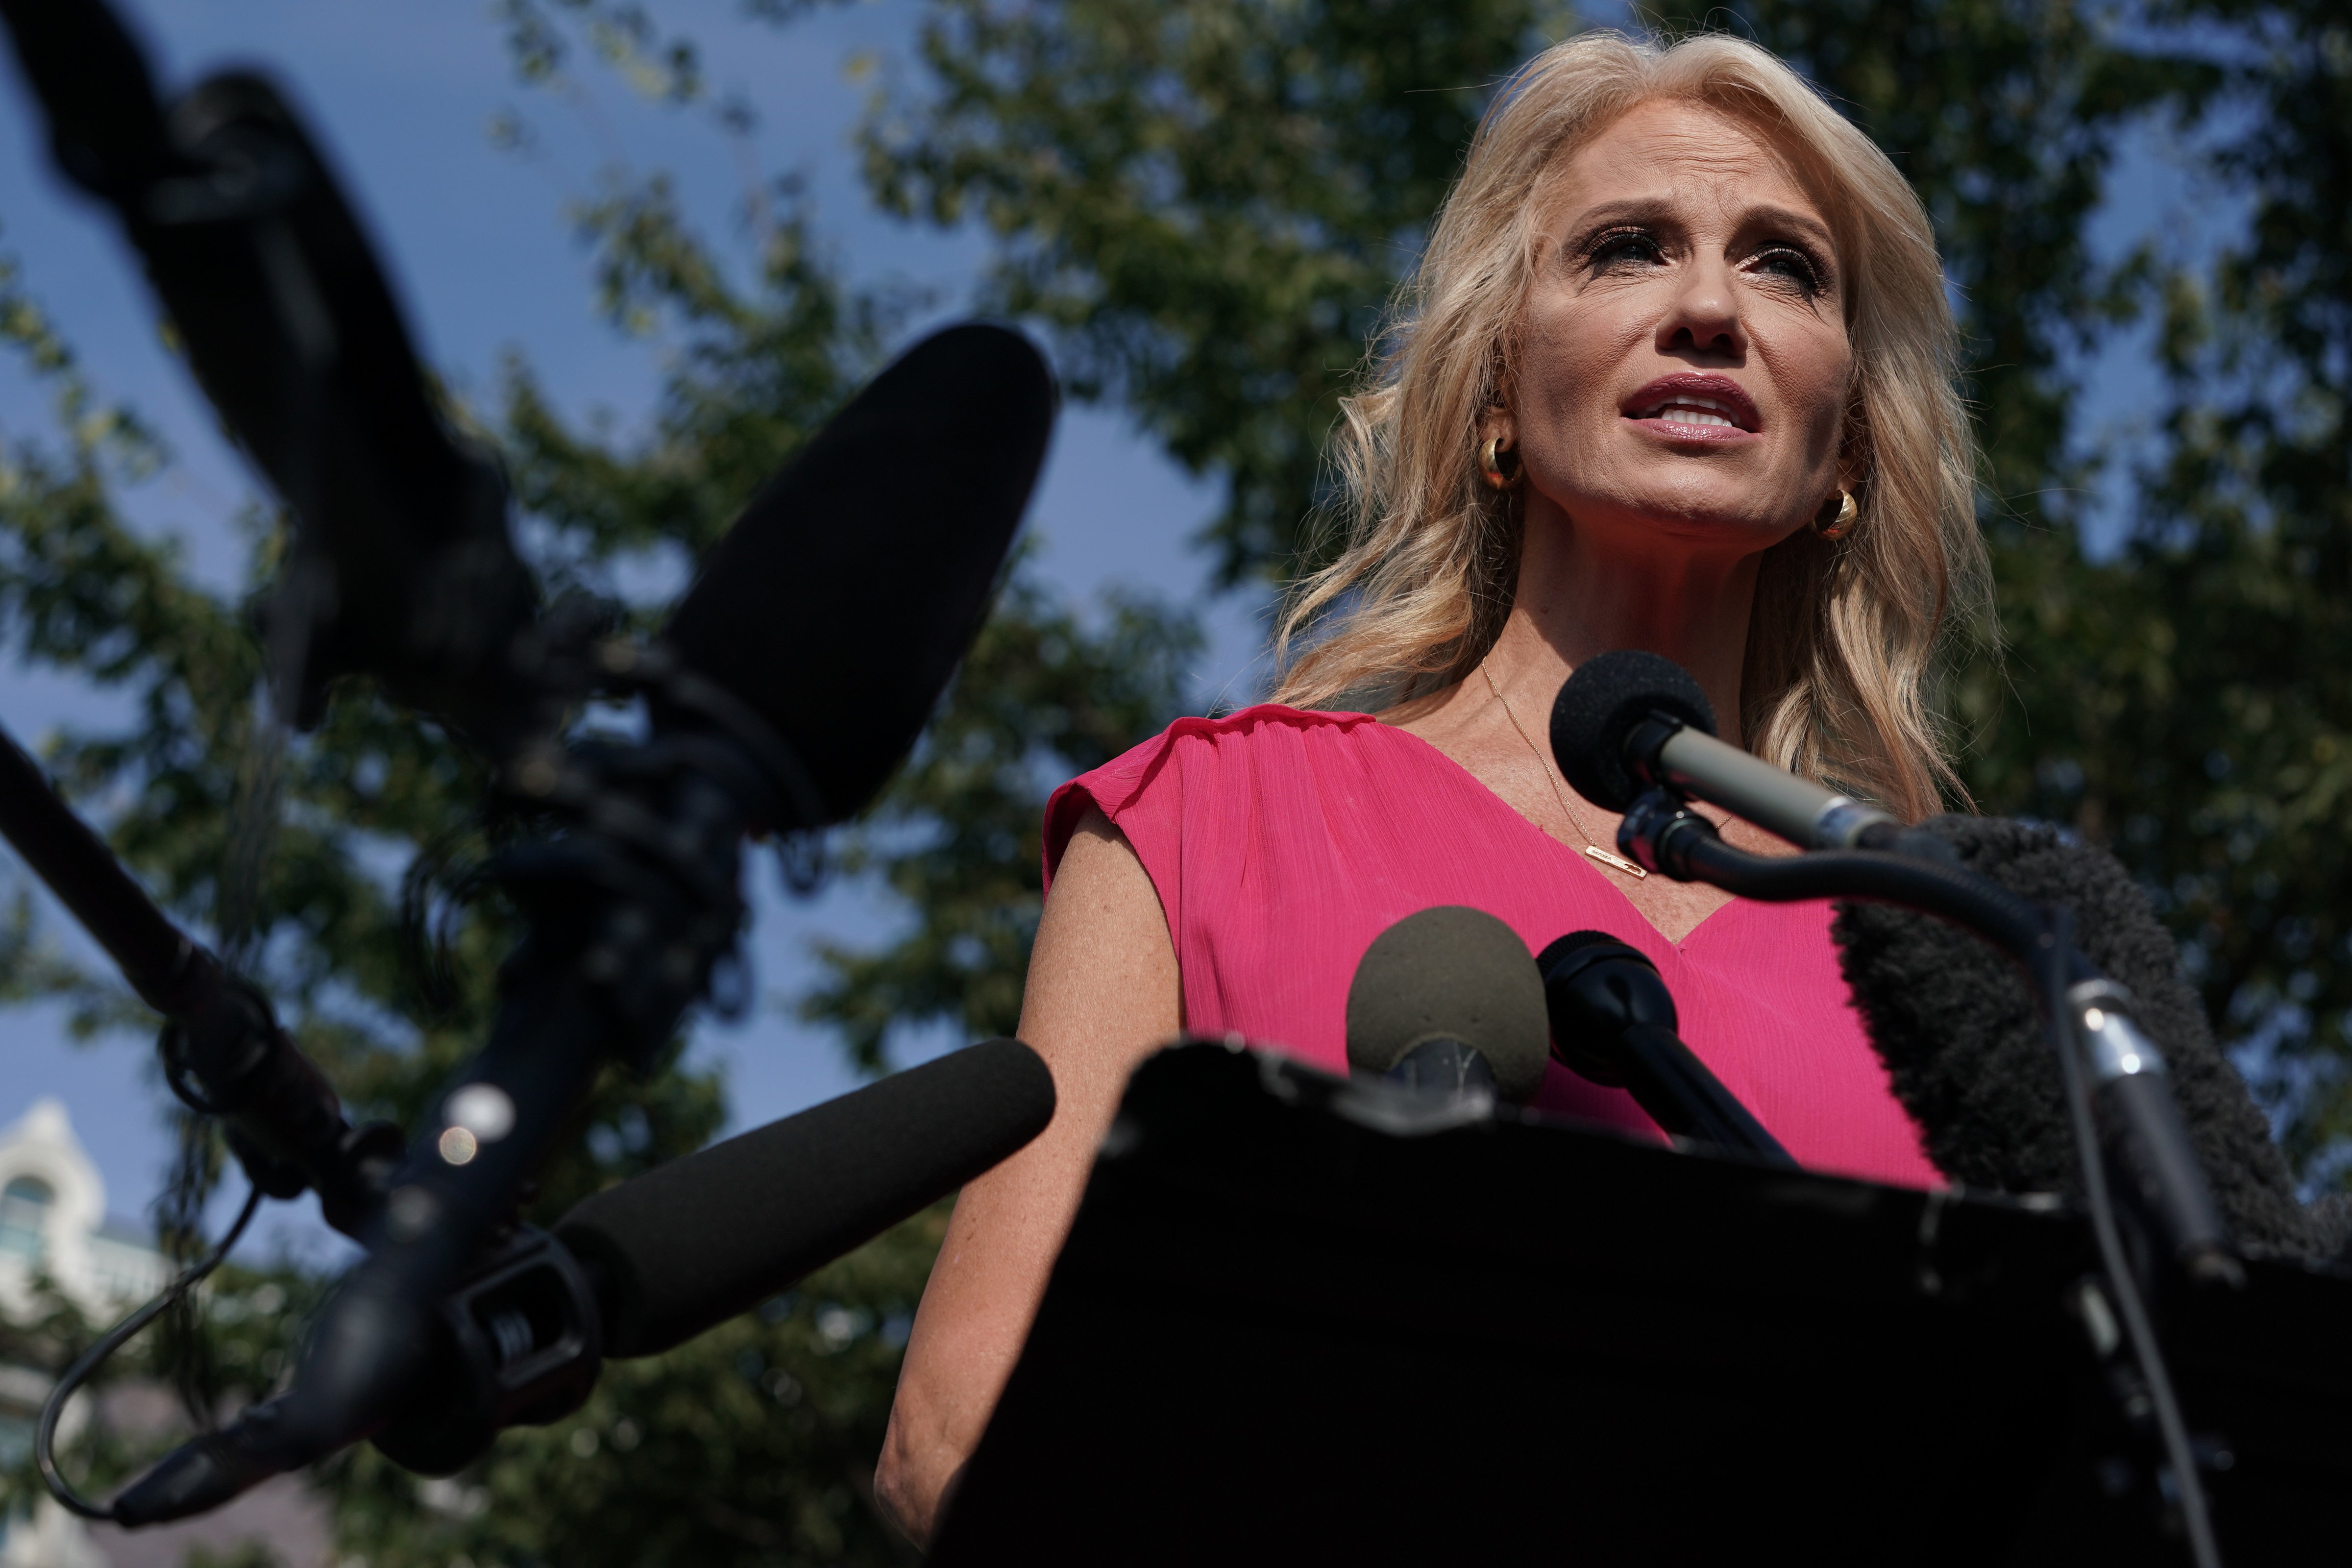 Kellyanne Conway speaks to members of the media outside the West Wing of the White House September 12, 2019 in Washington, D.C. (Alex Wong—Getty Images)